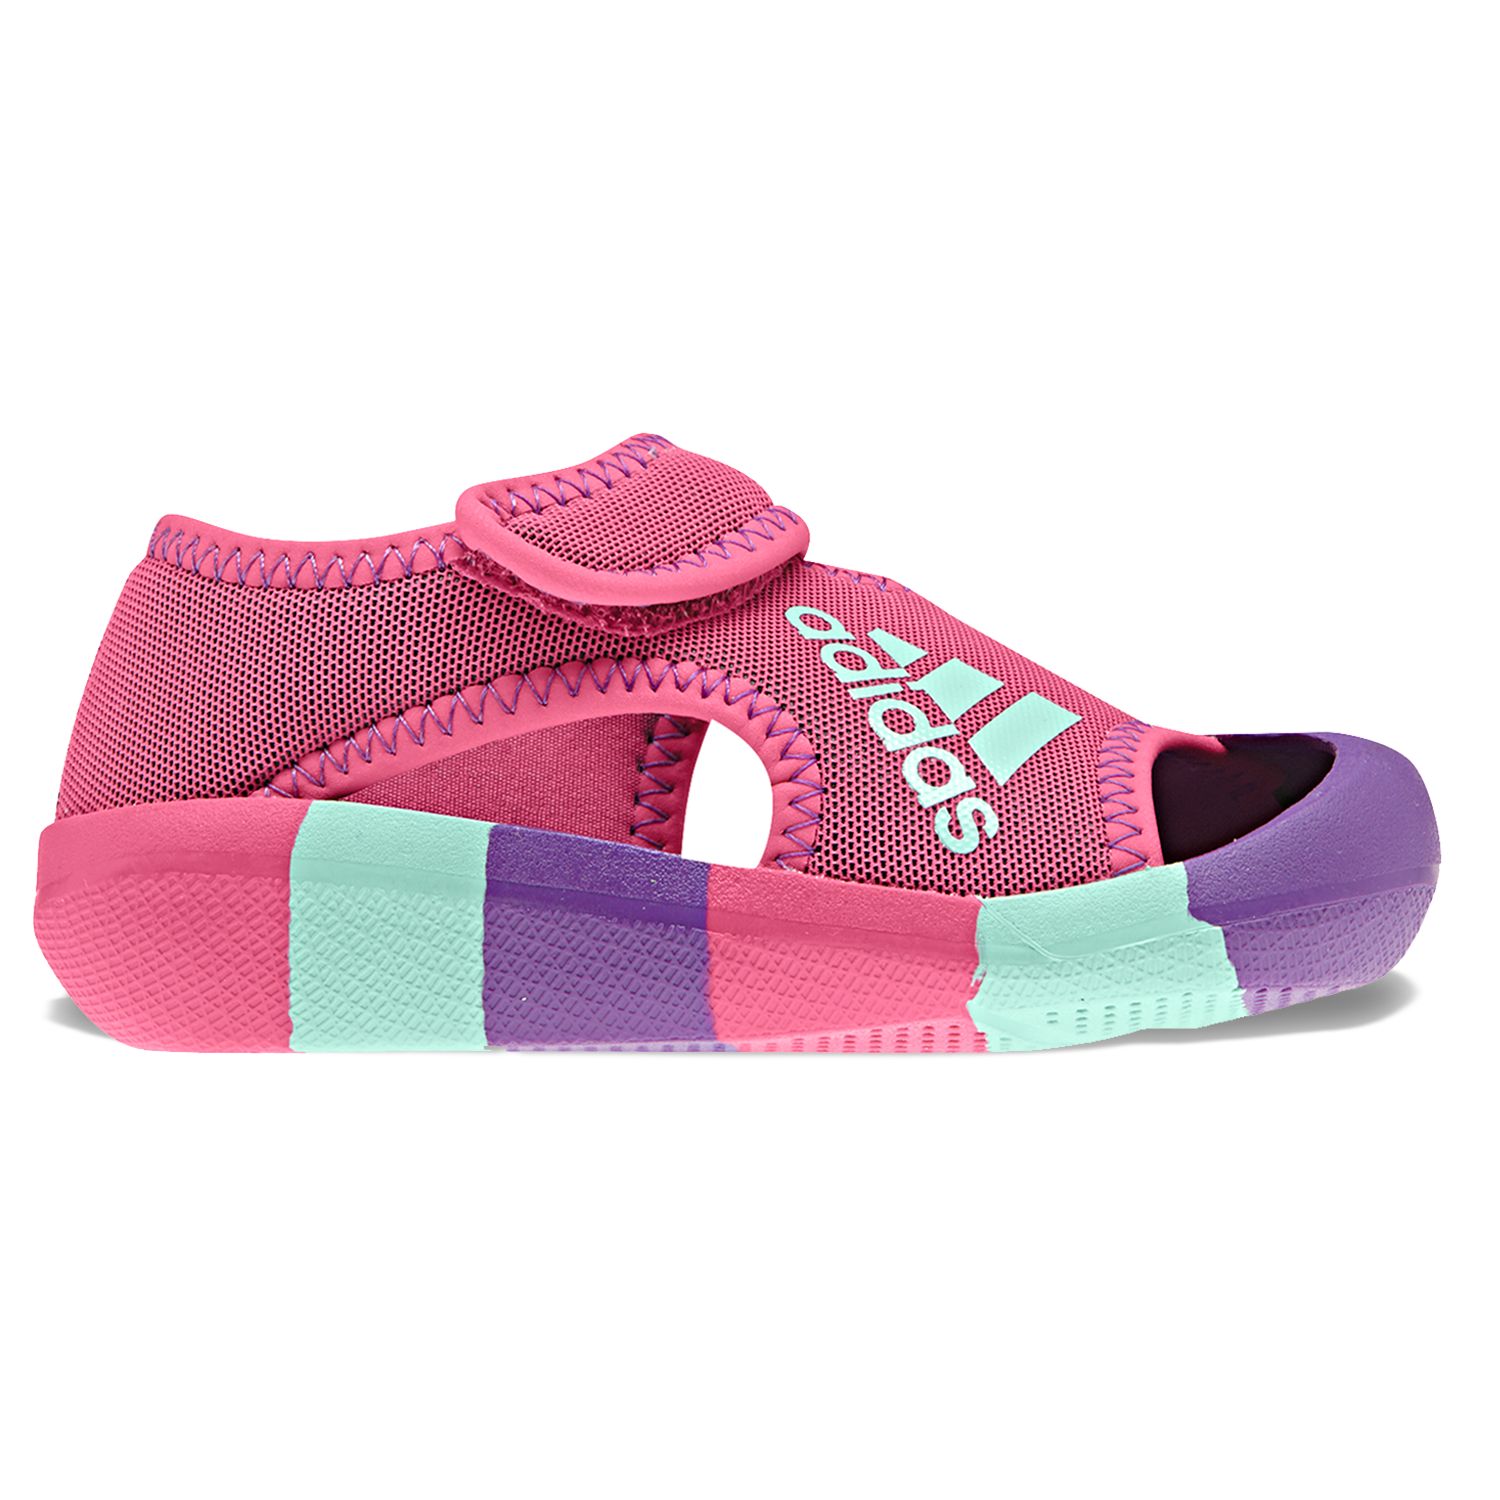 adidas sneakers for toddler girl